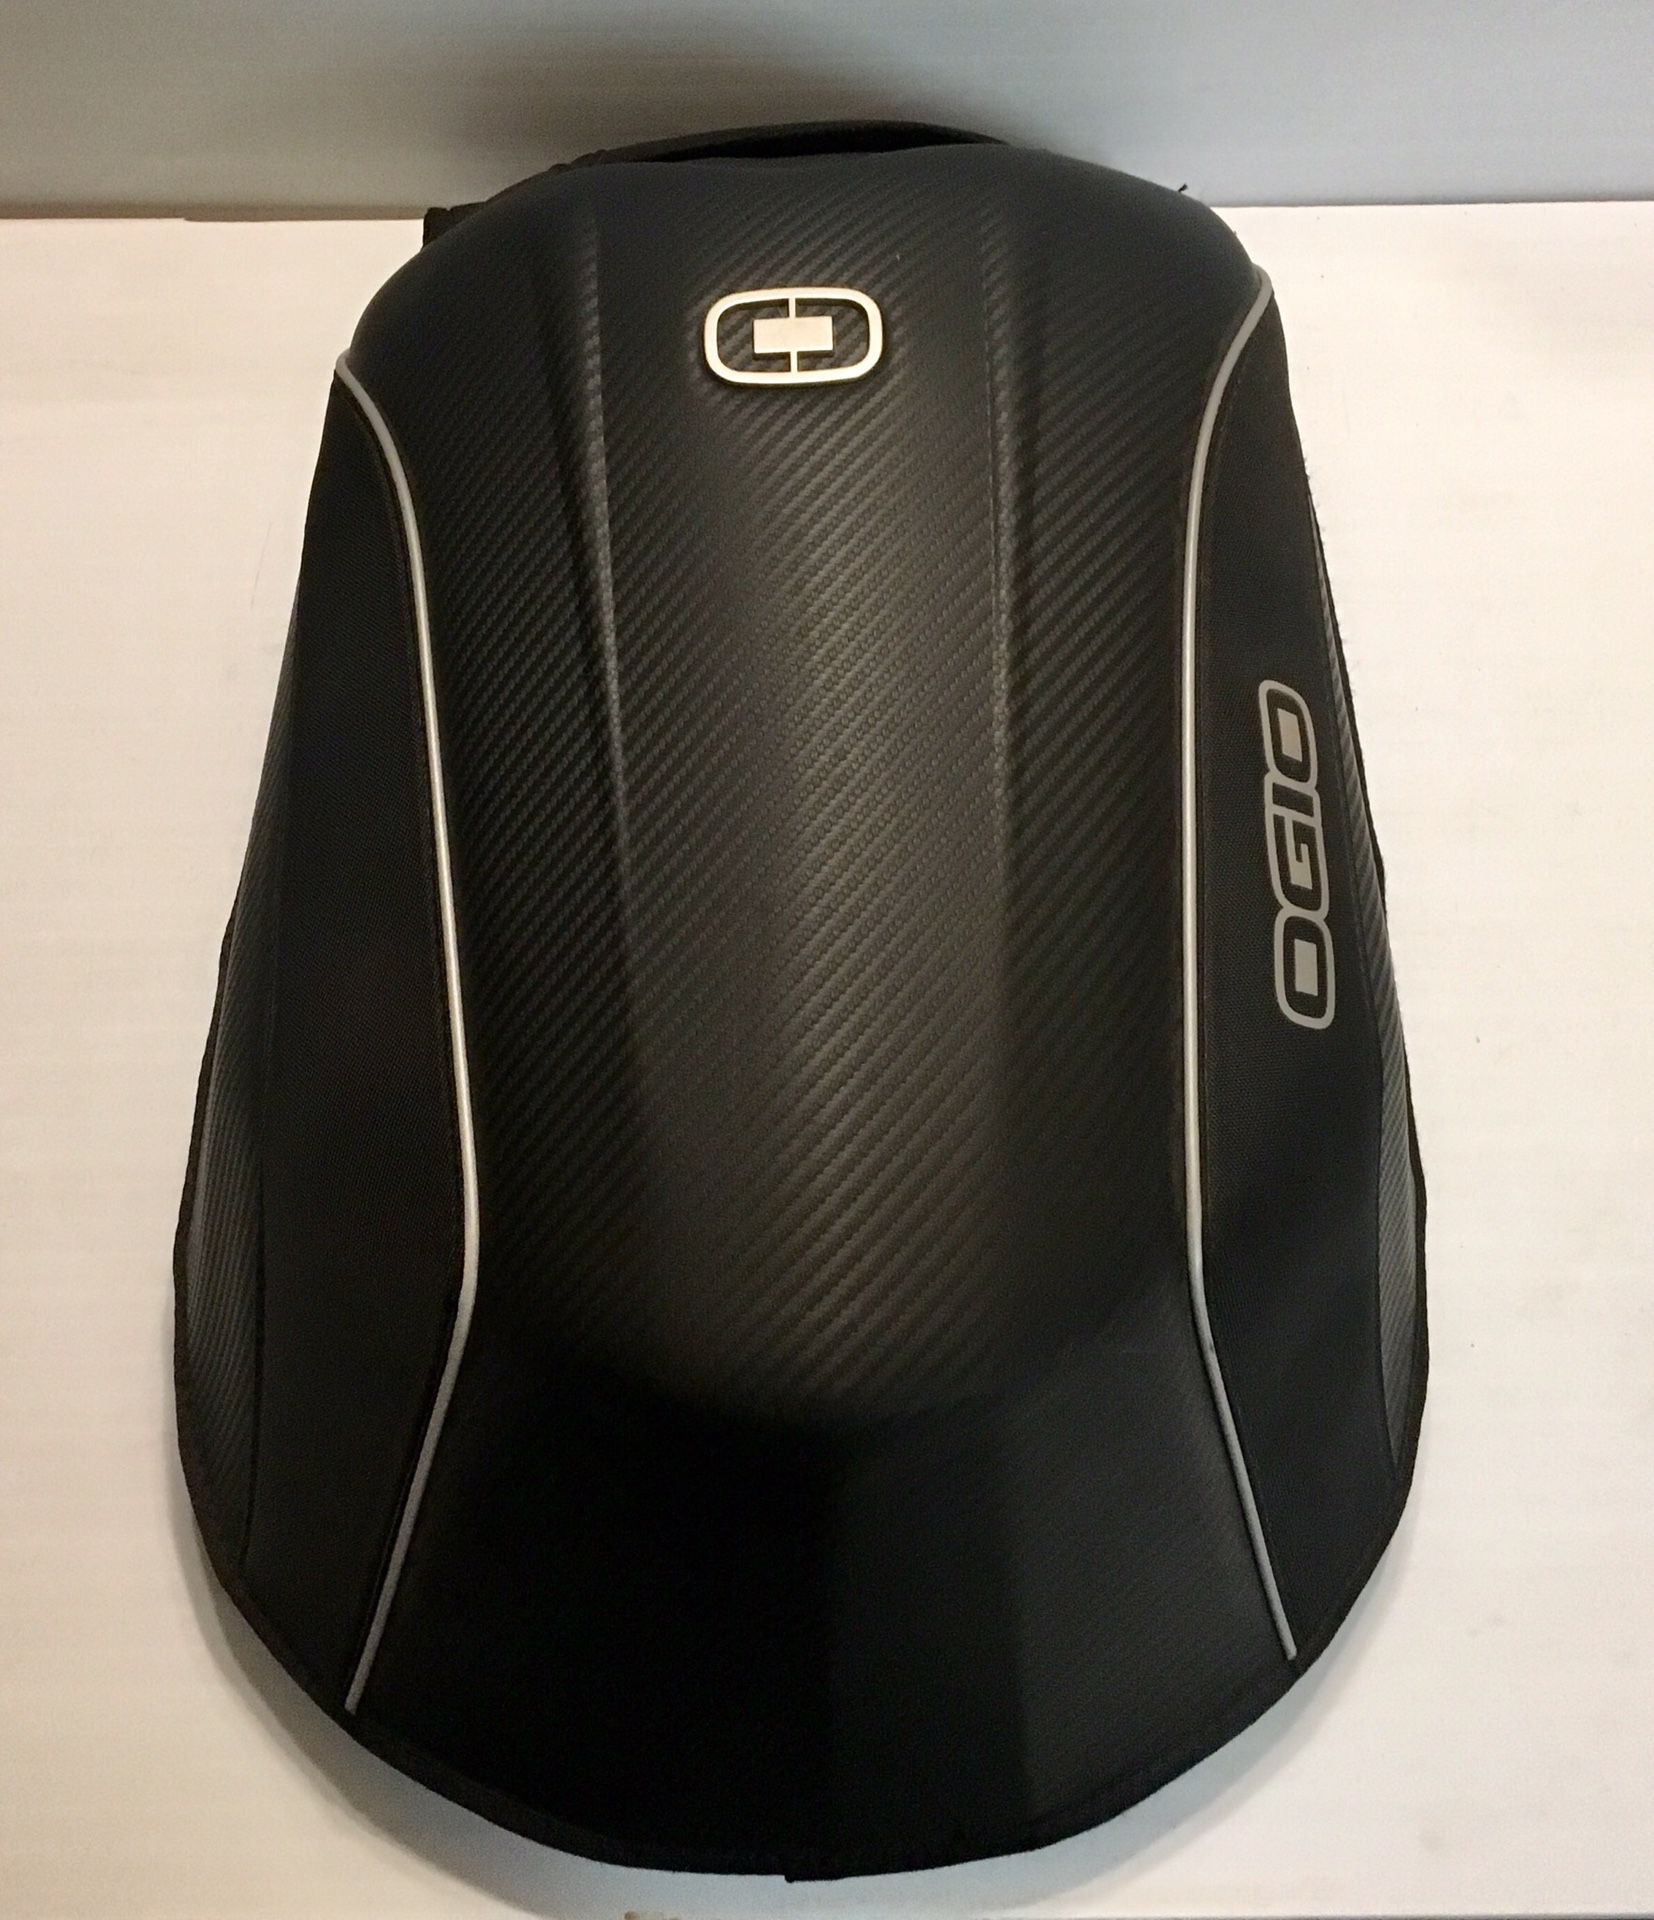 OGIO NO DRAG MACH 5 MOTORCYCLE HARD BACKPACK BLACK In very good condition.